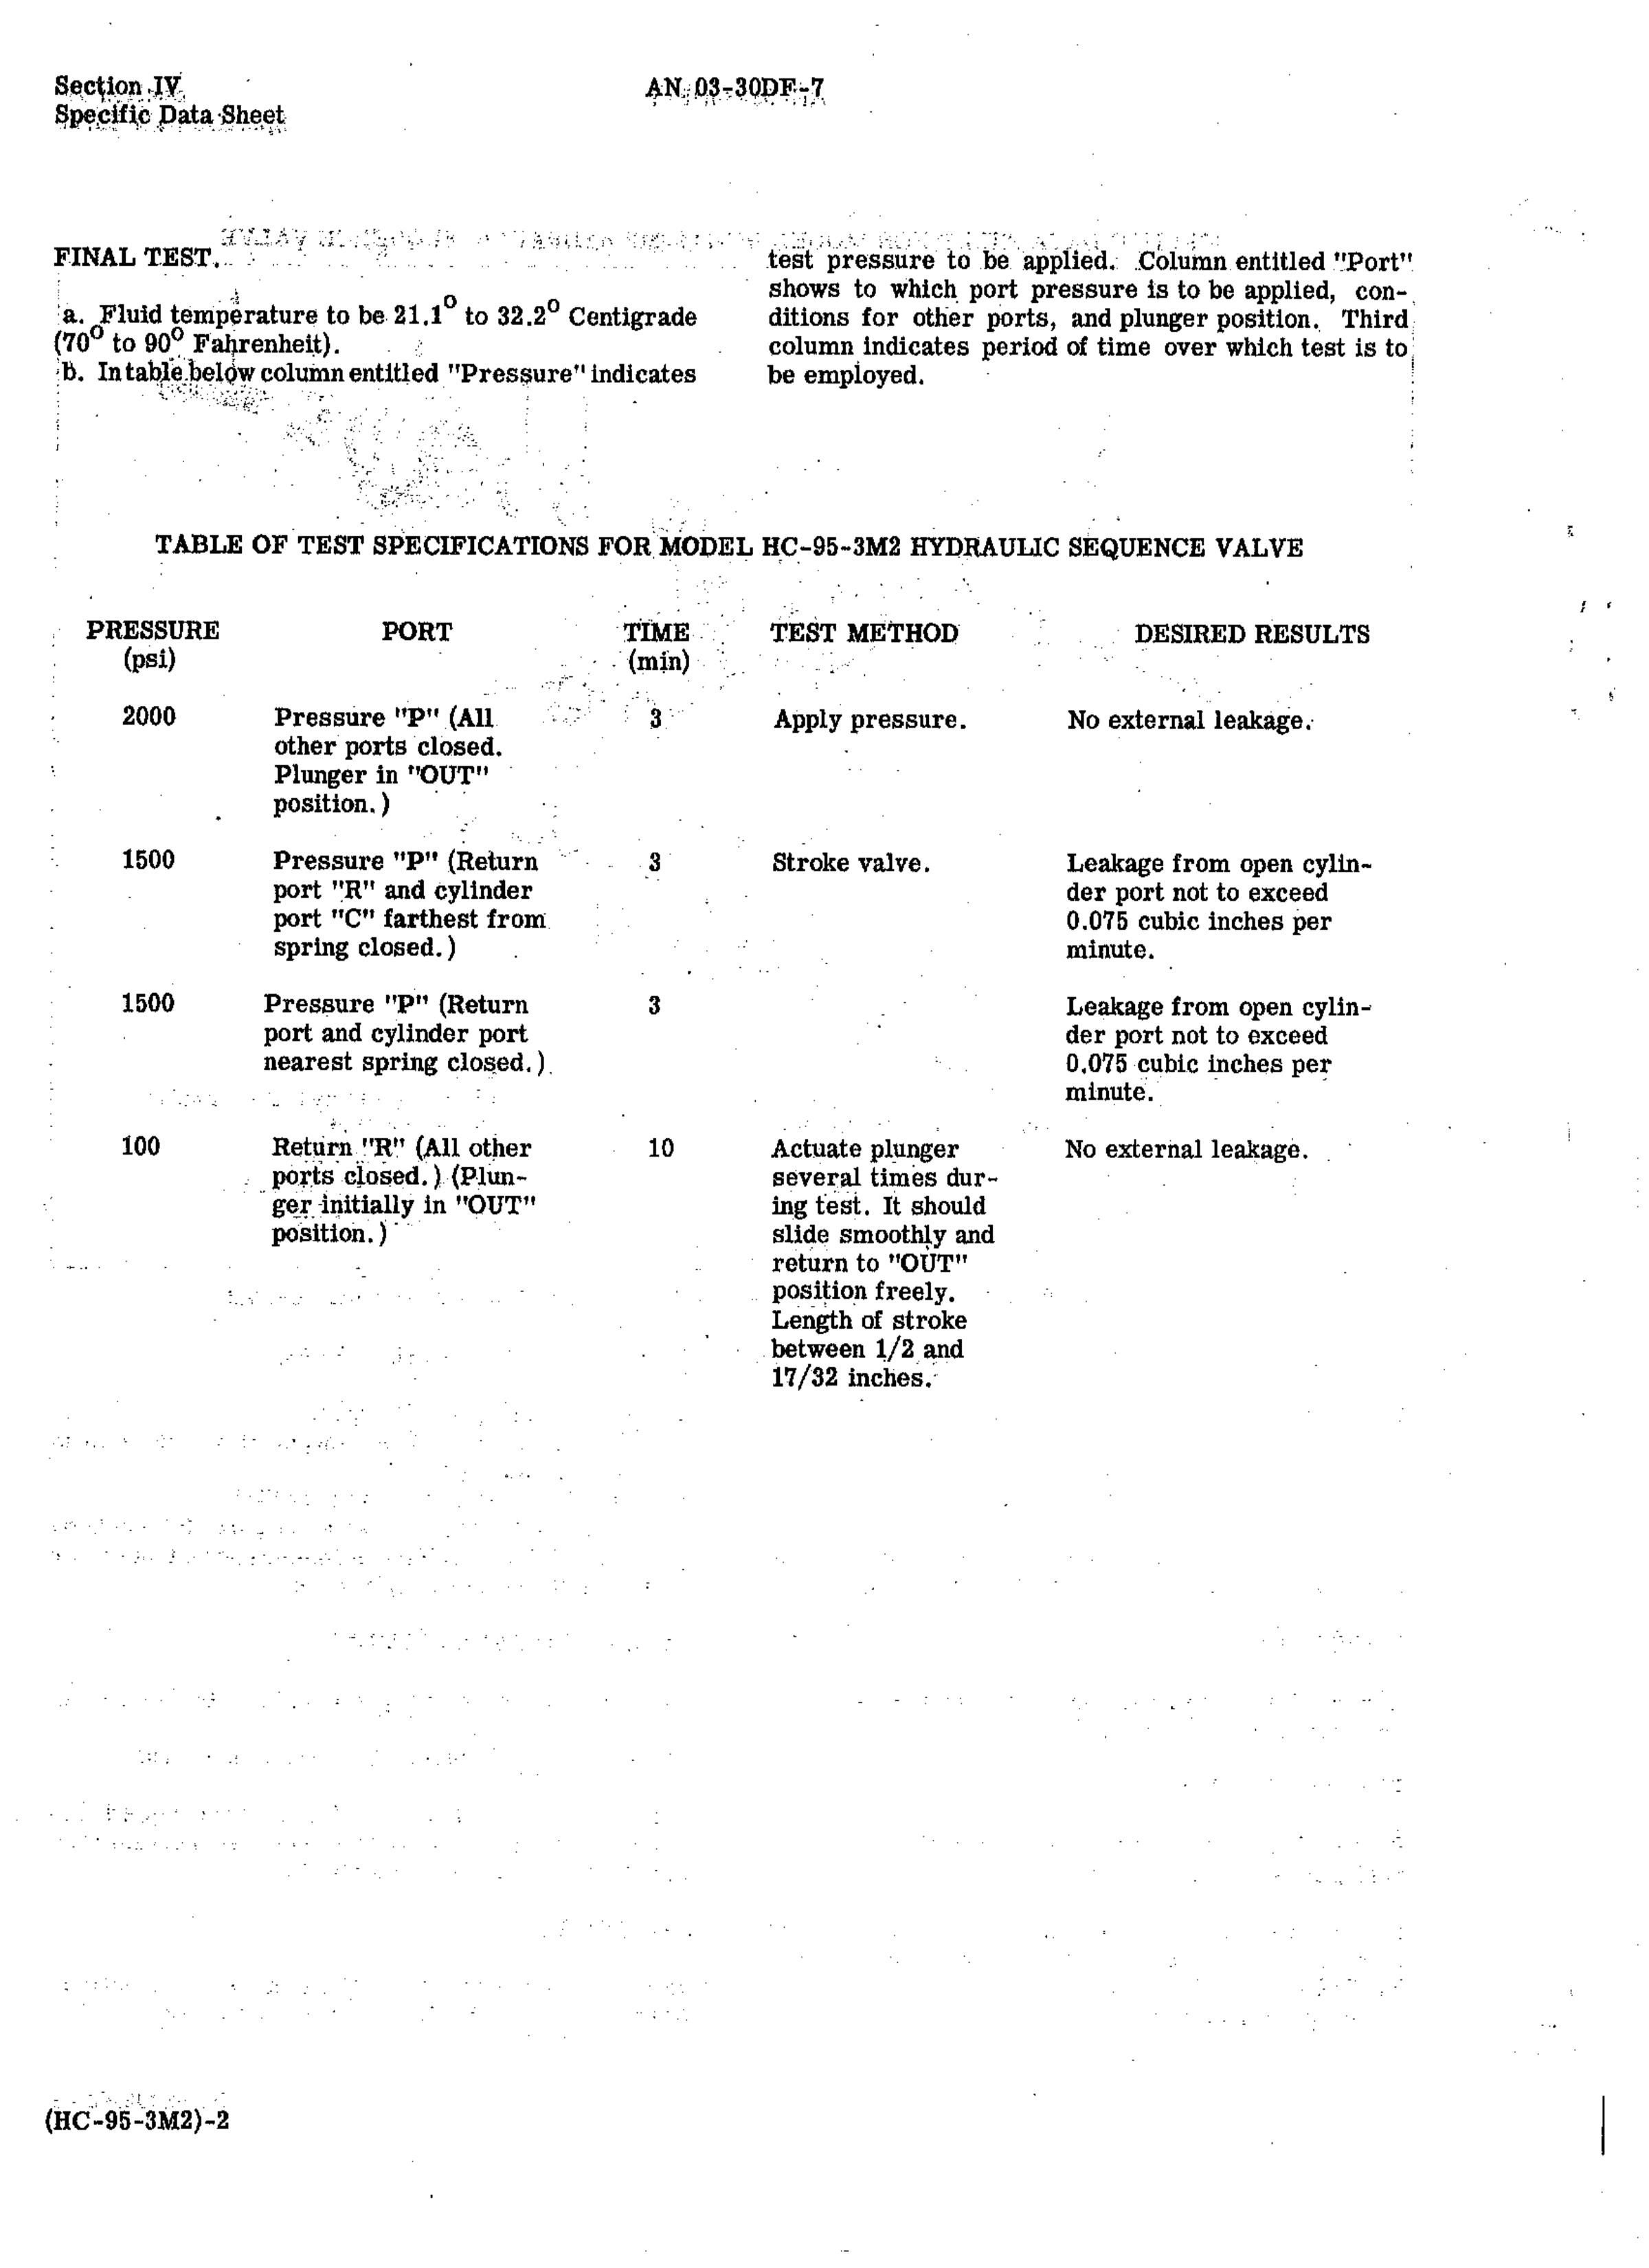 Sample page 6 from AirCorps Library document: Overhaul Instructions for Hydraulic Sequence Valves